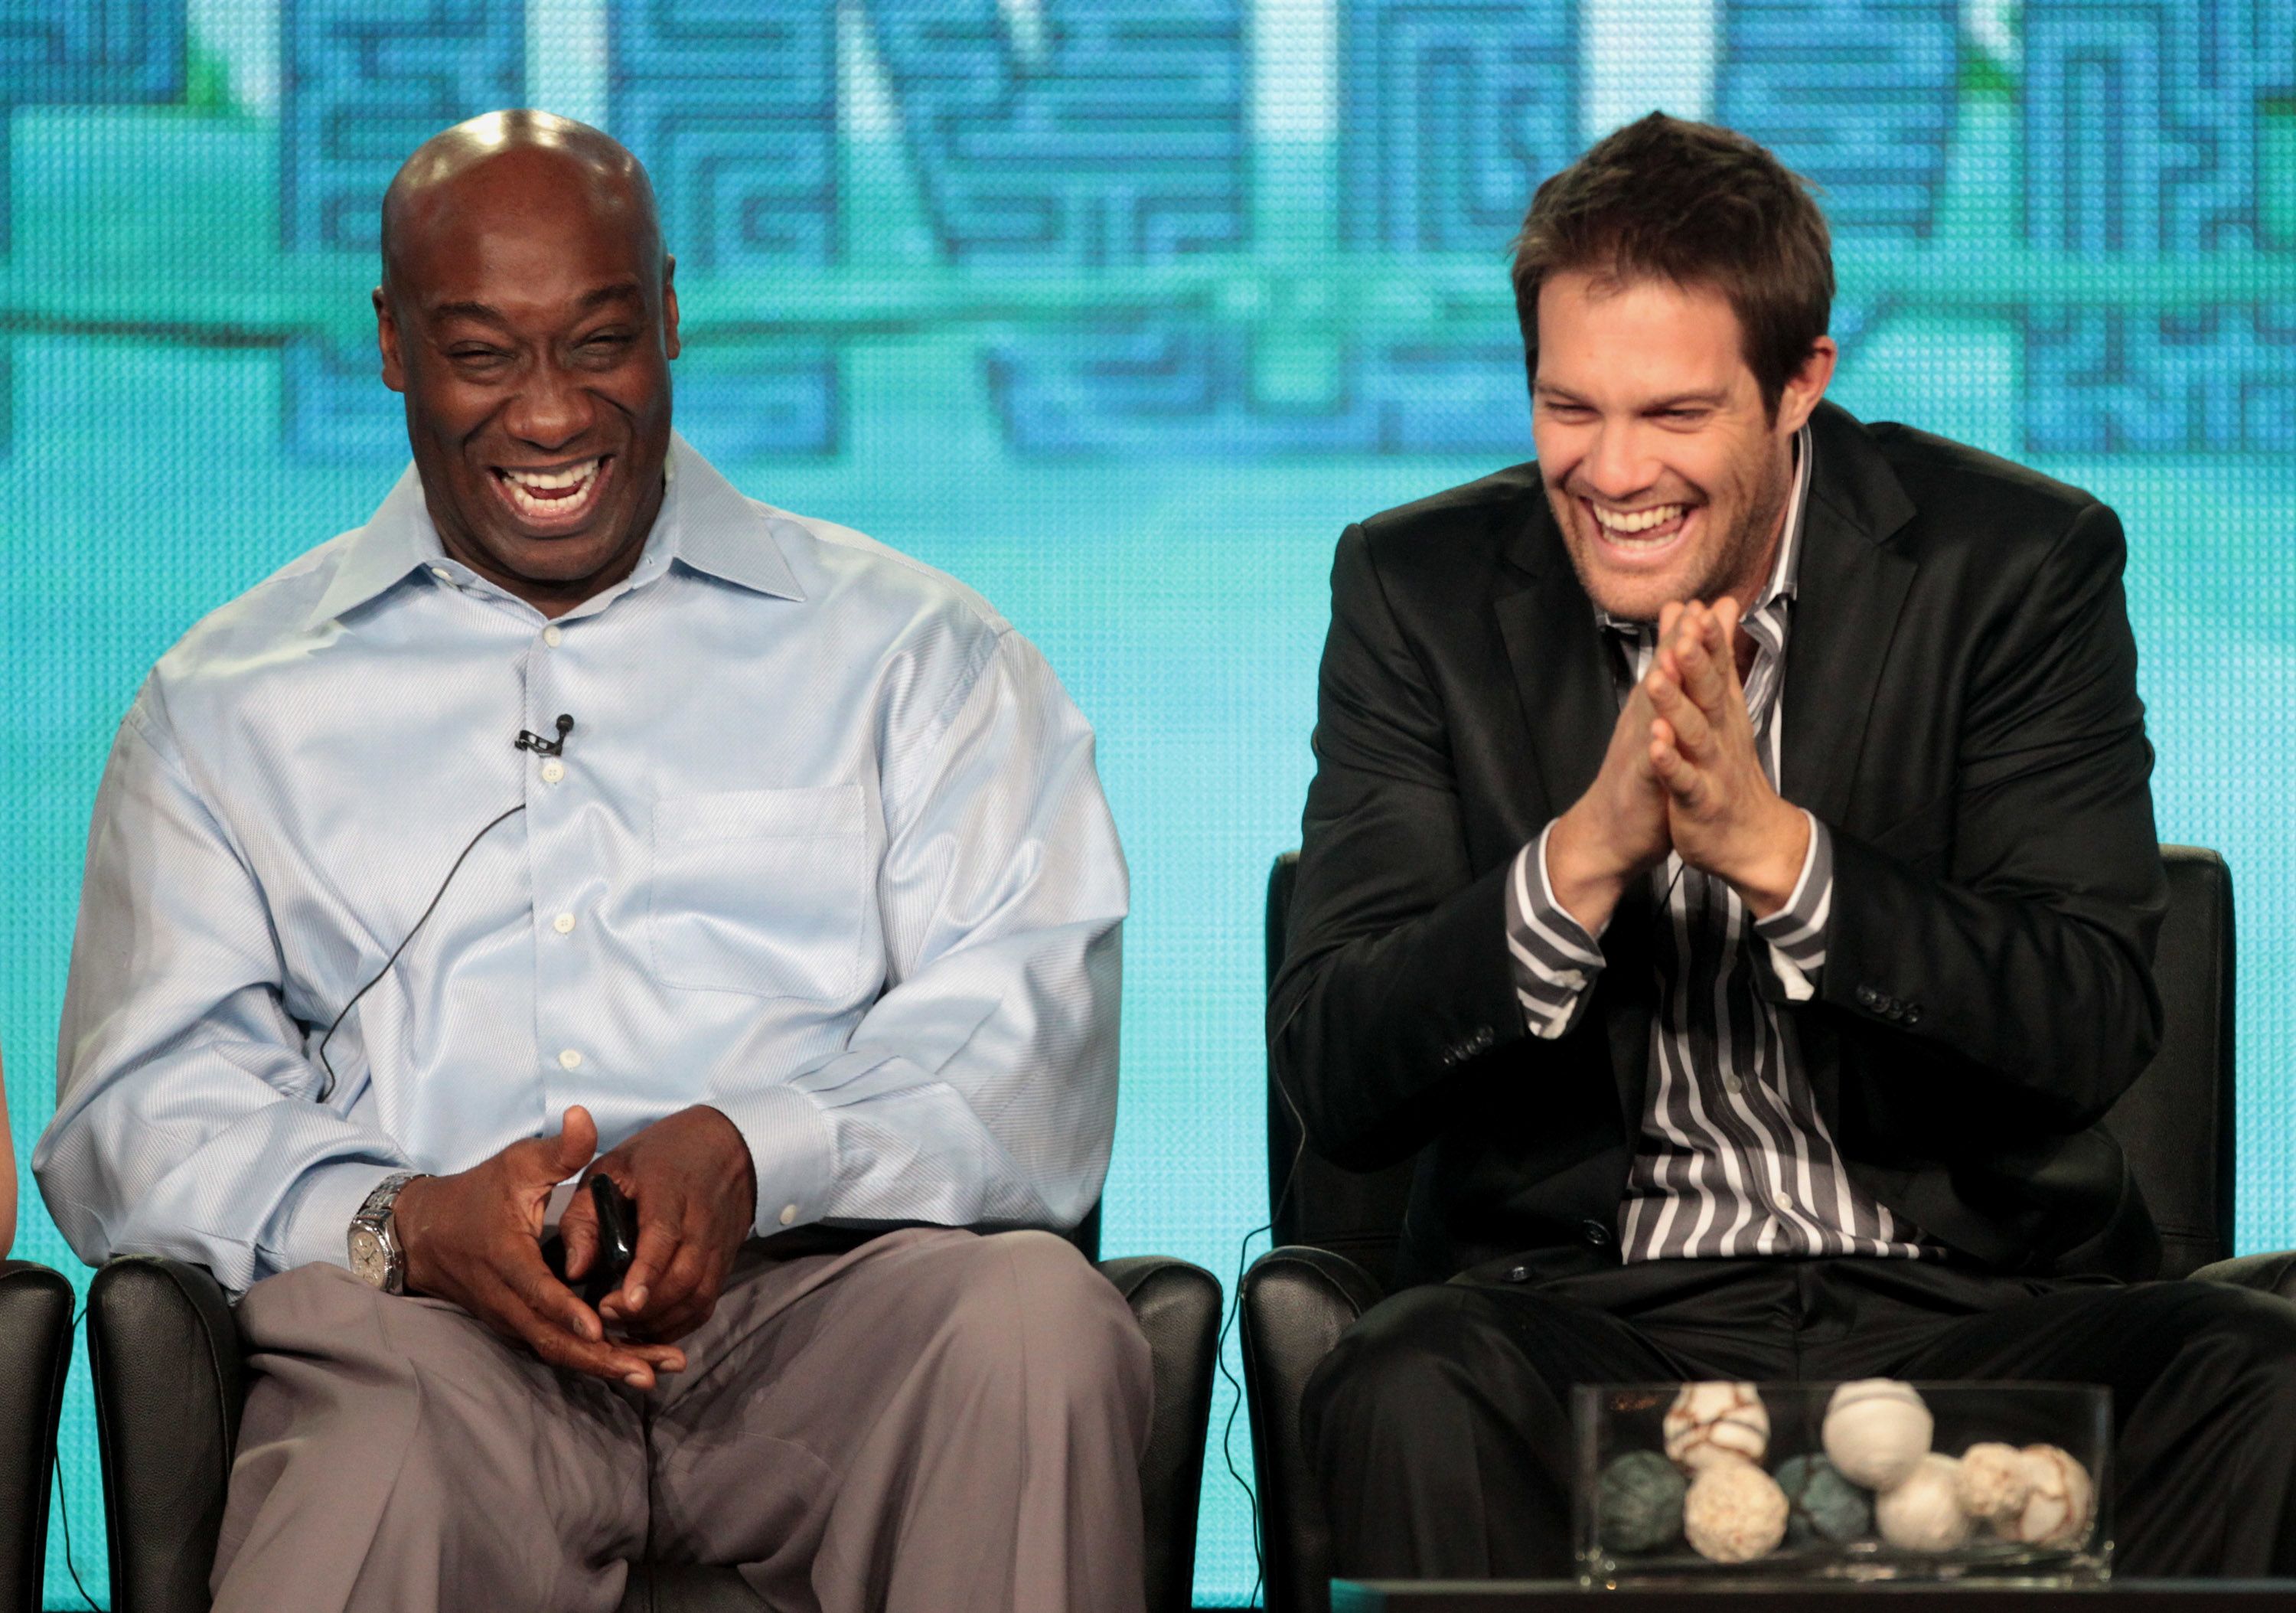 Actor Michael Clarke Duncan repped his beloved White Sox until the end